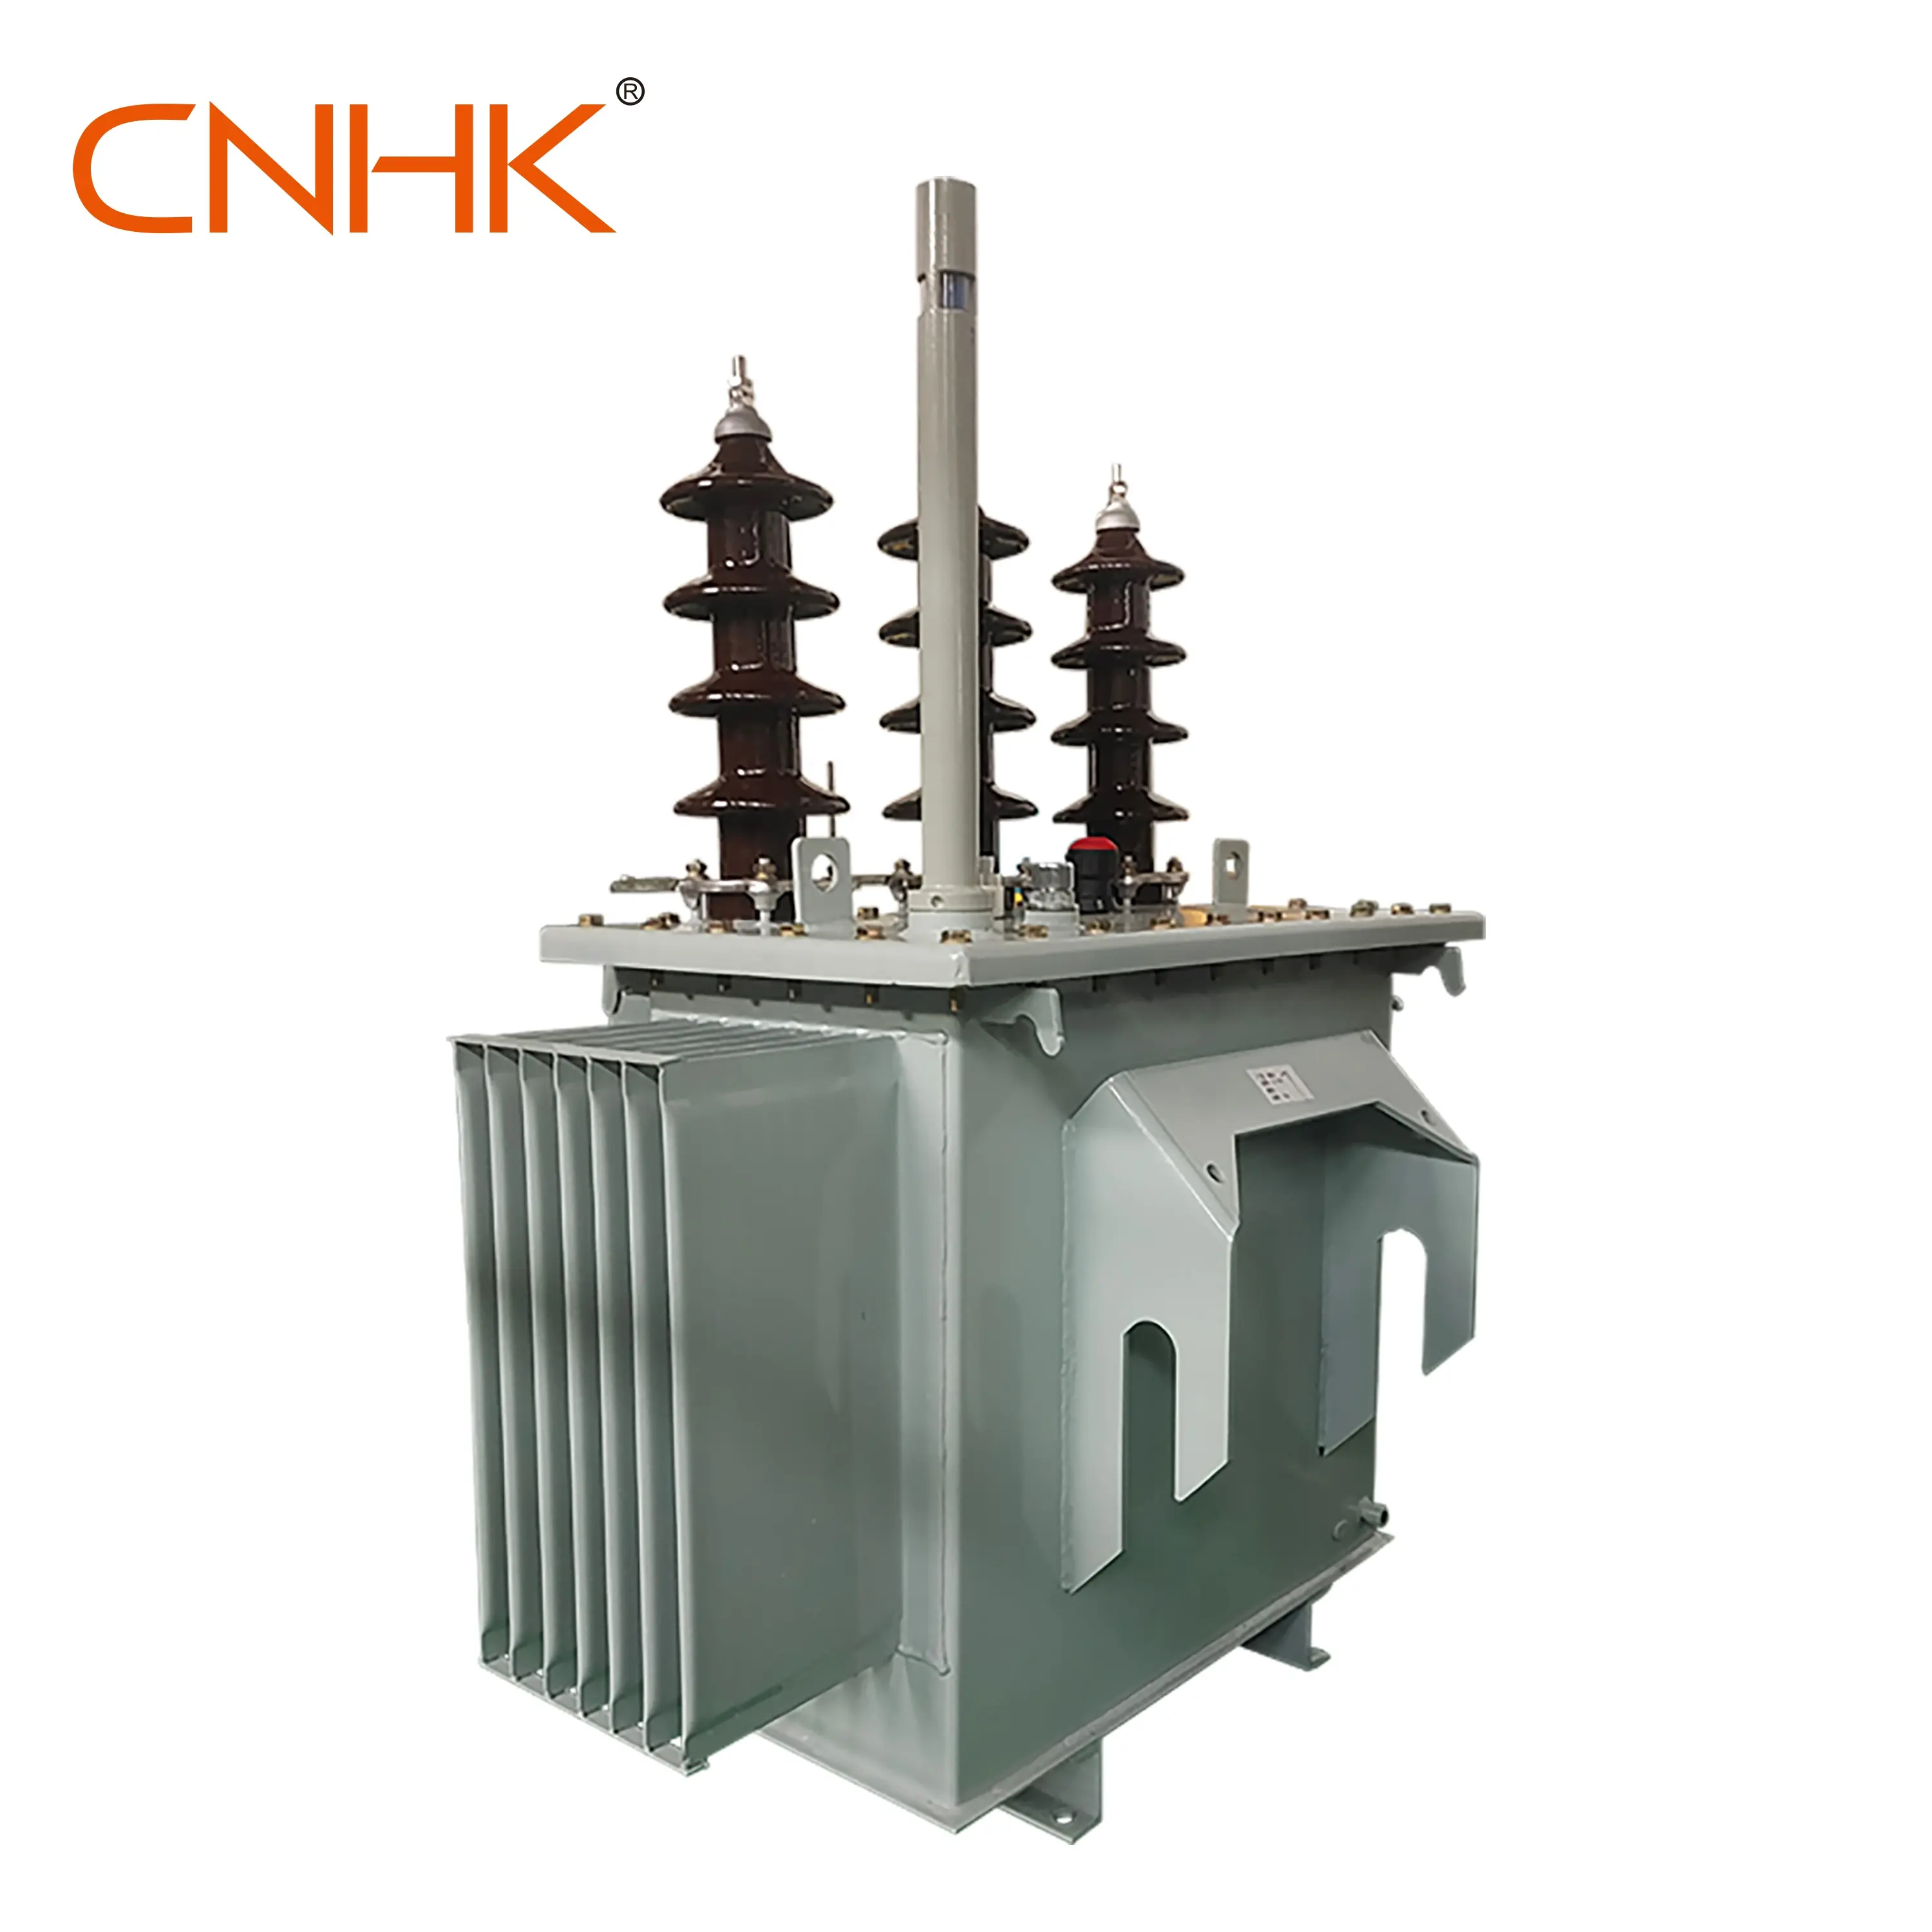 CNHK High pole oil immersed three phase distribution transformer 50kVA 20kV with back bracket low price and good performance